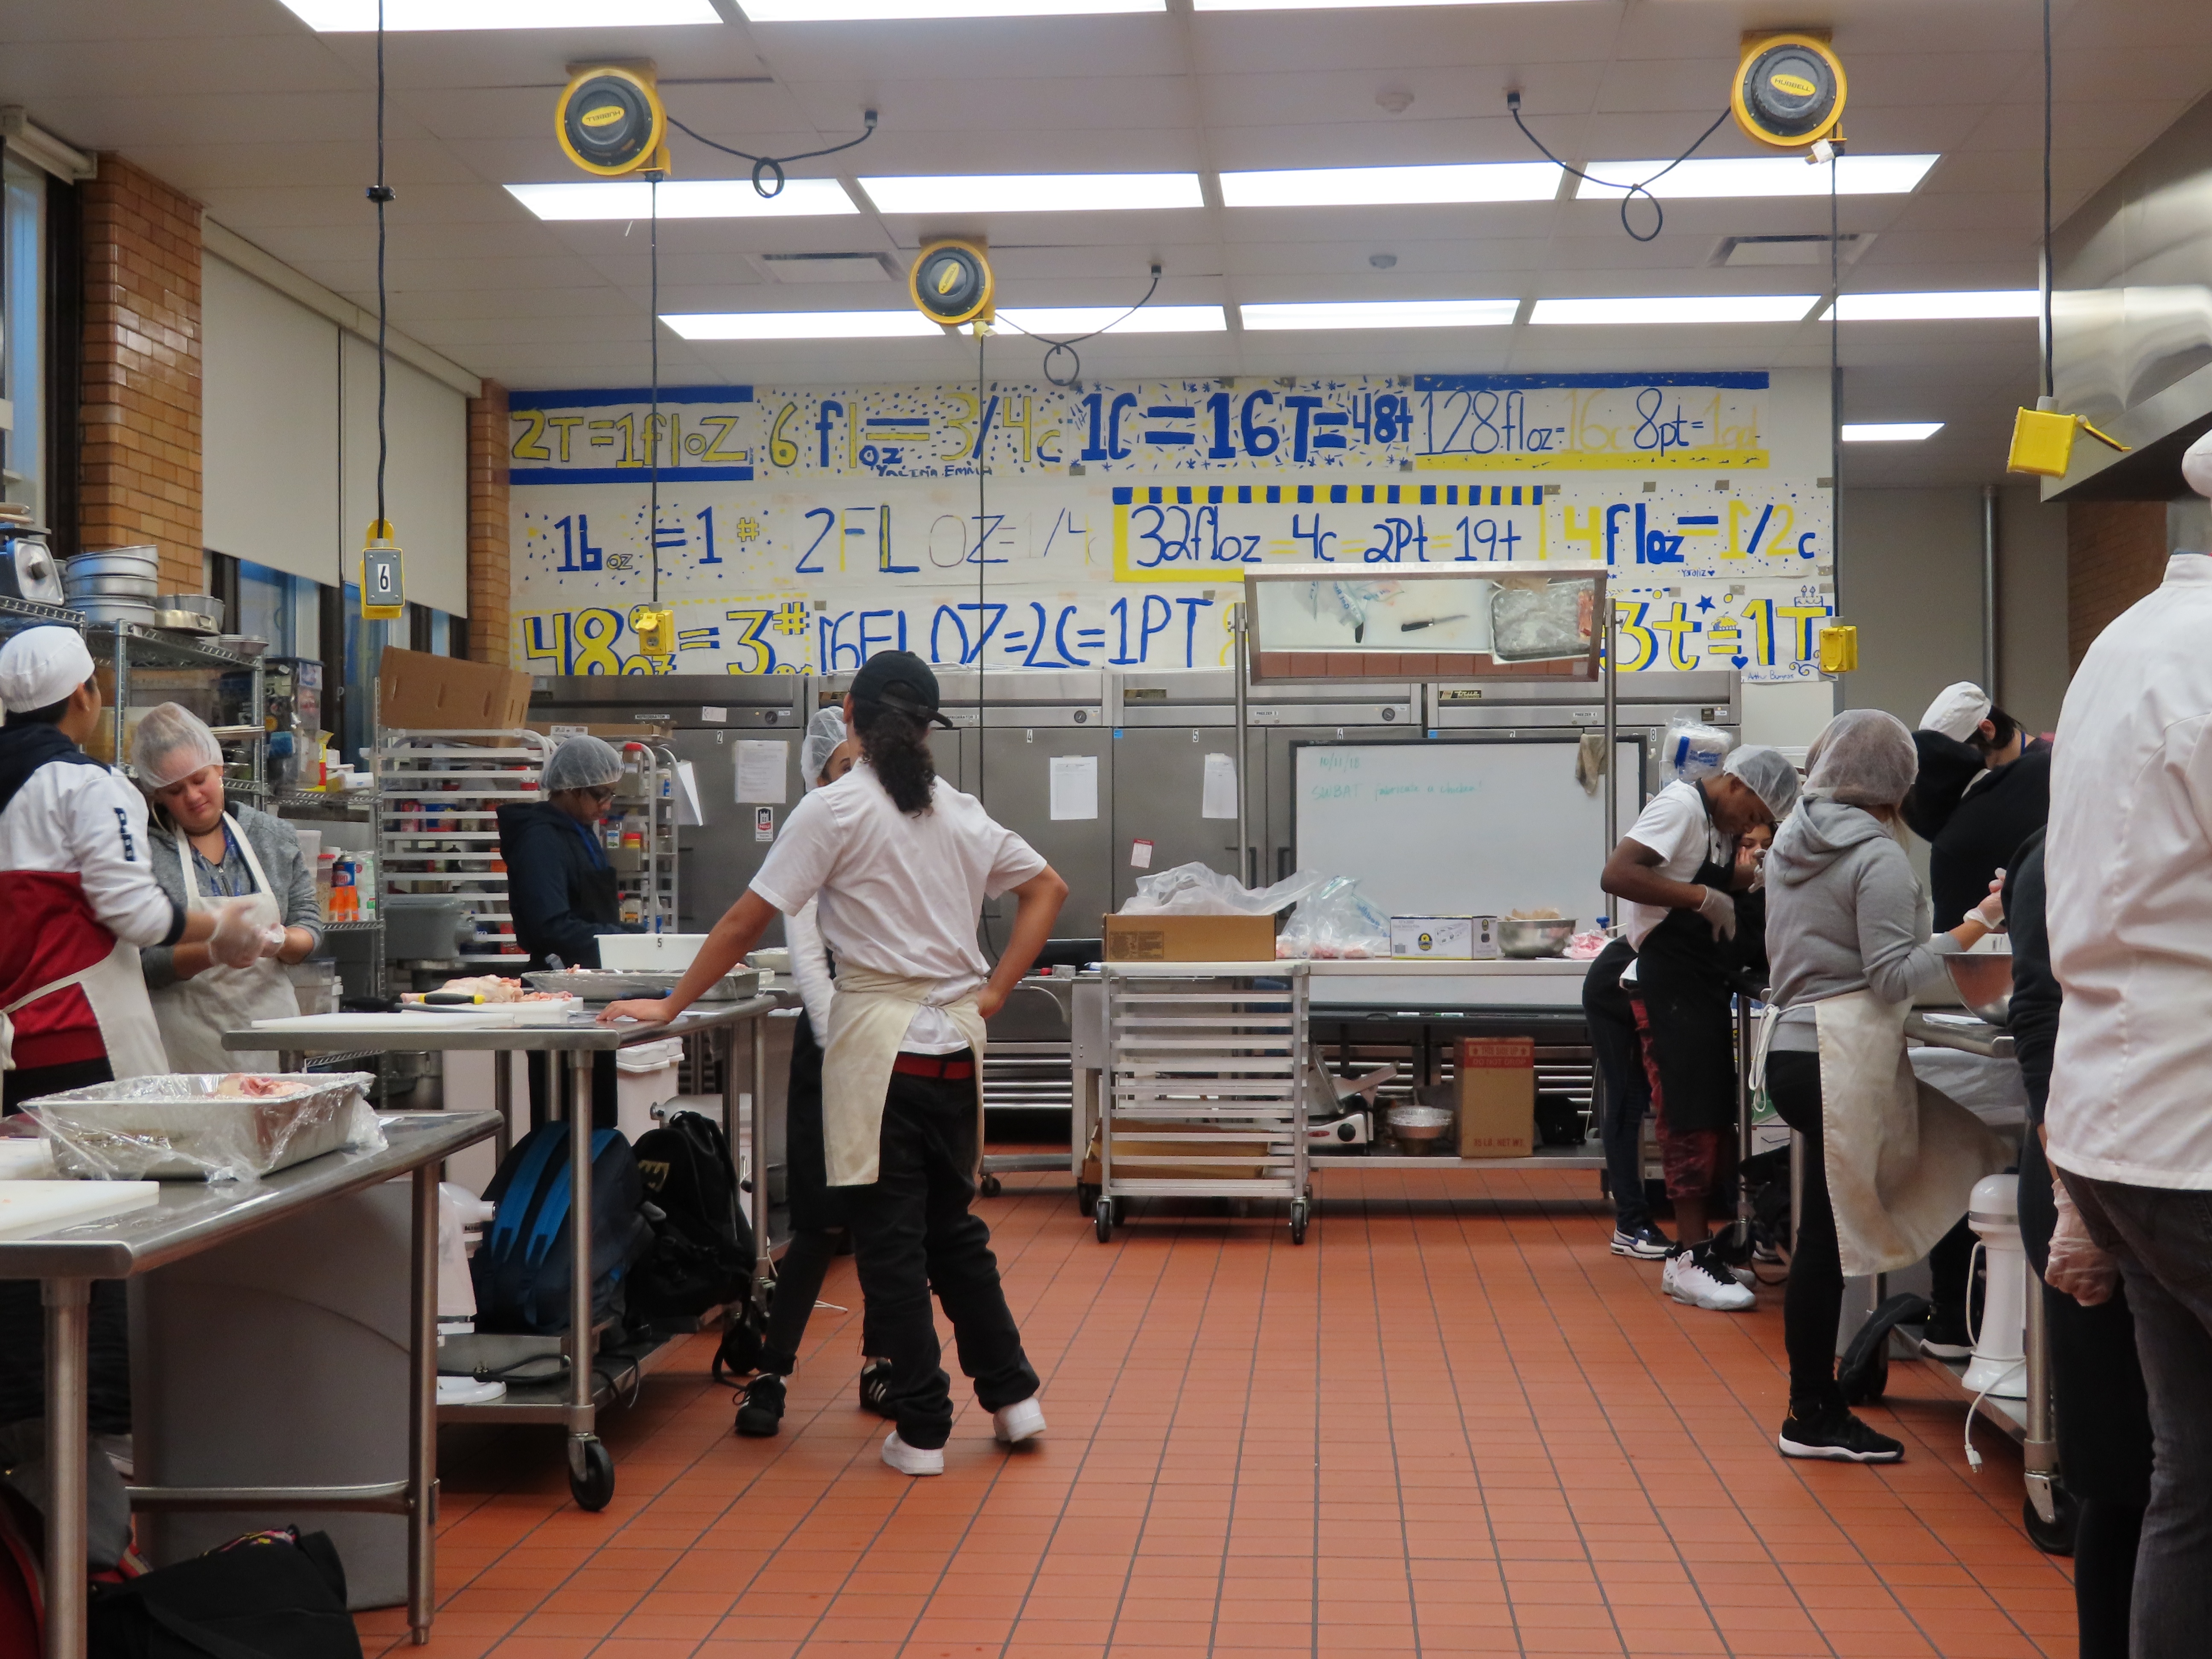 A culinary course at Theodore Roosevelt High School in Albany Park